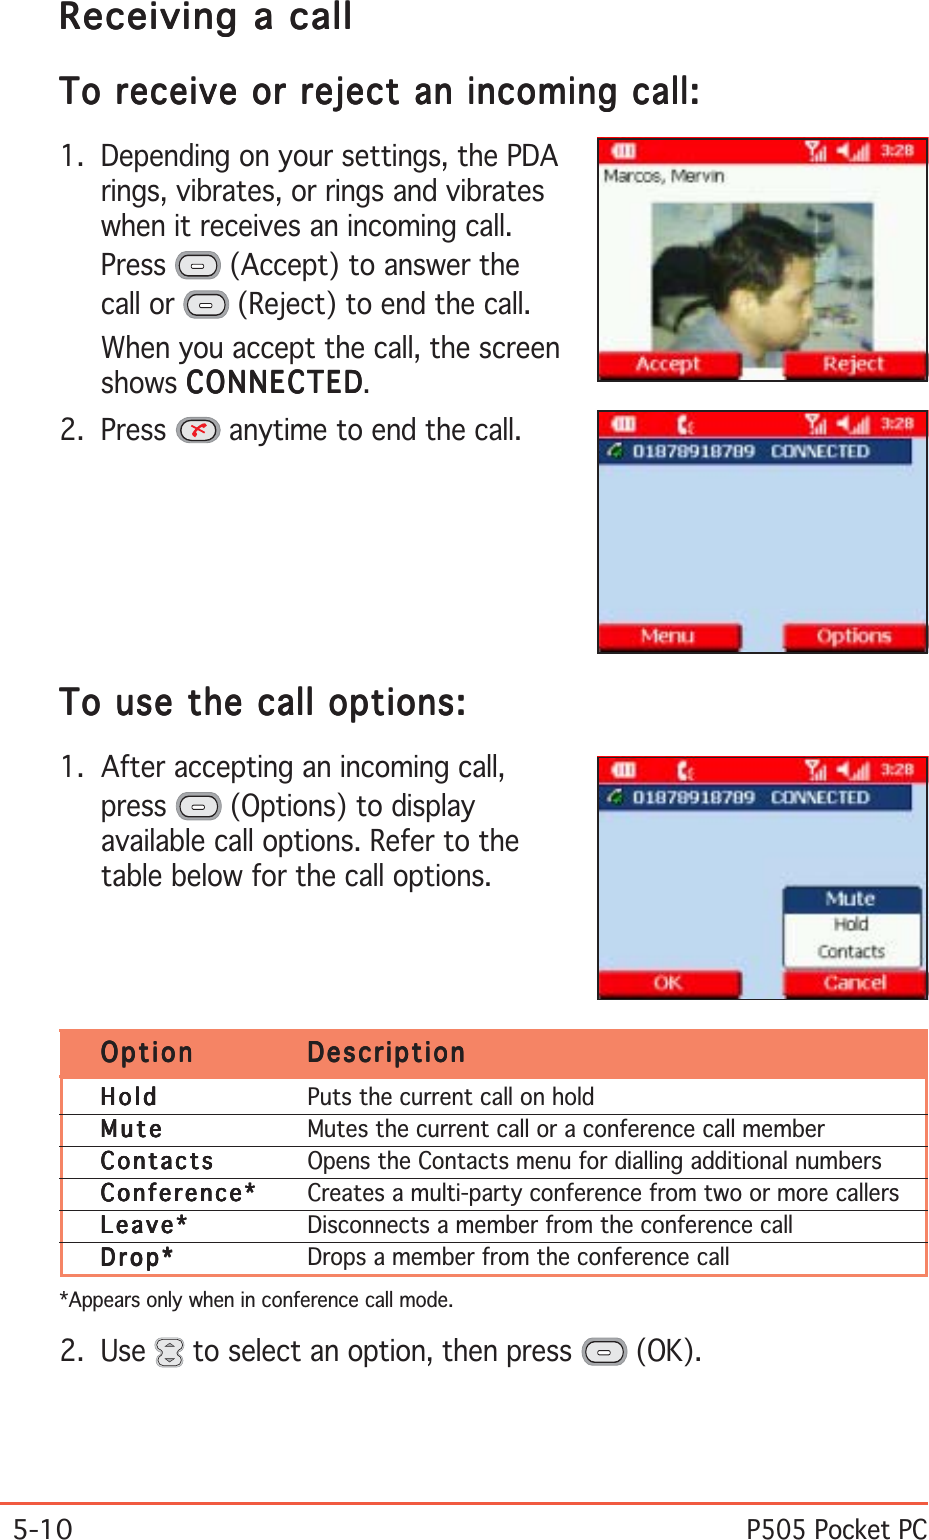 5-10P505 Pocket PCTo use the call options:To use the call options:To use the call options:To use the call options:To use the call options:1. After accepting an incoming call,press  (Options) to displayavailable call options. Refer to thetable below for the call options.Receiving a callReceiving a callReceiving a callReceiving a callReceiving a callTo receive or reject an incoming call:To receive or reject an incoming call:To receive or reject an incoming call:To receive or reject an incoming call:To receive or reject an incoming call:1. Depending on your settings, the PDArings, vibrates, or rings and vibrateswhen it receives an incoming call.Press  (Accept) to answer thecall or   (Reject) to end the call.When you accept the call, the screenshows CONNECTEDCONNECTEDCONNECTEDCONNECTEDCONNECTED.2. Press   anytime to end the call.OptionOptionOptionOptionOption DescriptionDescriptionDescriptionDescriptionDescriptionHoldHoldHoldHoldH o l d Puts the current call on holdMuteMuteMuteMuteM u t e Mutes the current call or a conference call memberContactsContactsContactsContactsC o n t a c t s Opens the Contacts menu for dialling additional numbersConference*Conference*Conference*Conference*C o n f e r e n c e * Creates a multi-party conference from two or more callersLeave*Leave*Leave*Leave*L e a v e * Disconnects a member from the conference callDrop*Drop*Drop*Drop*D r o p * Drops a member from the conference call*Appears only when in conference call mode.2. Use   to select an option, then press   (OK).